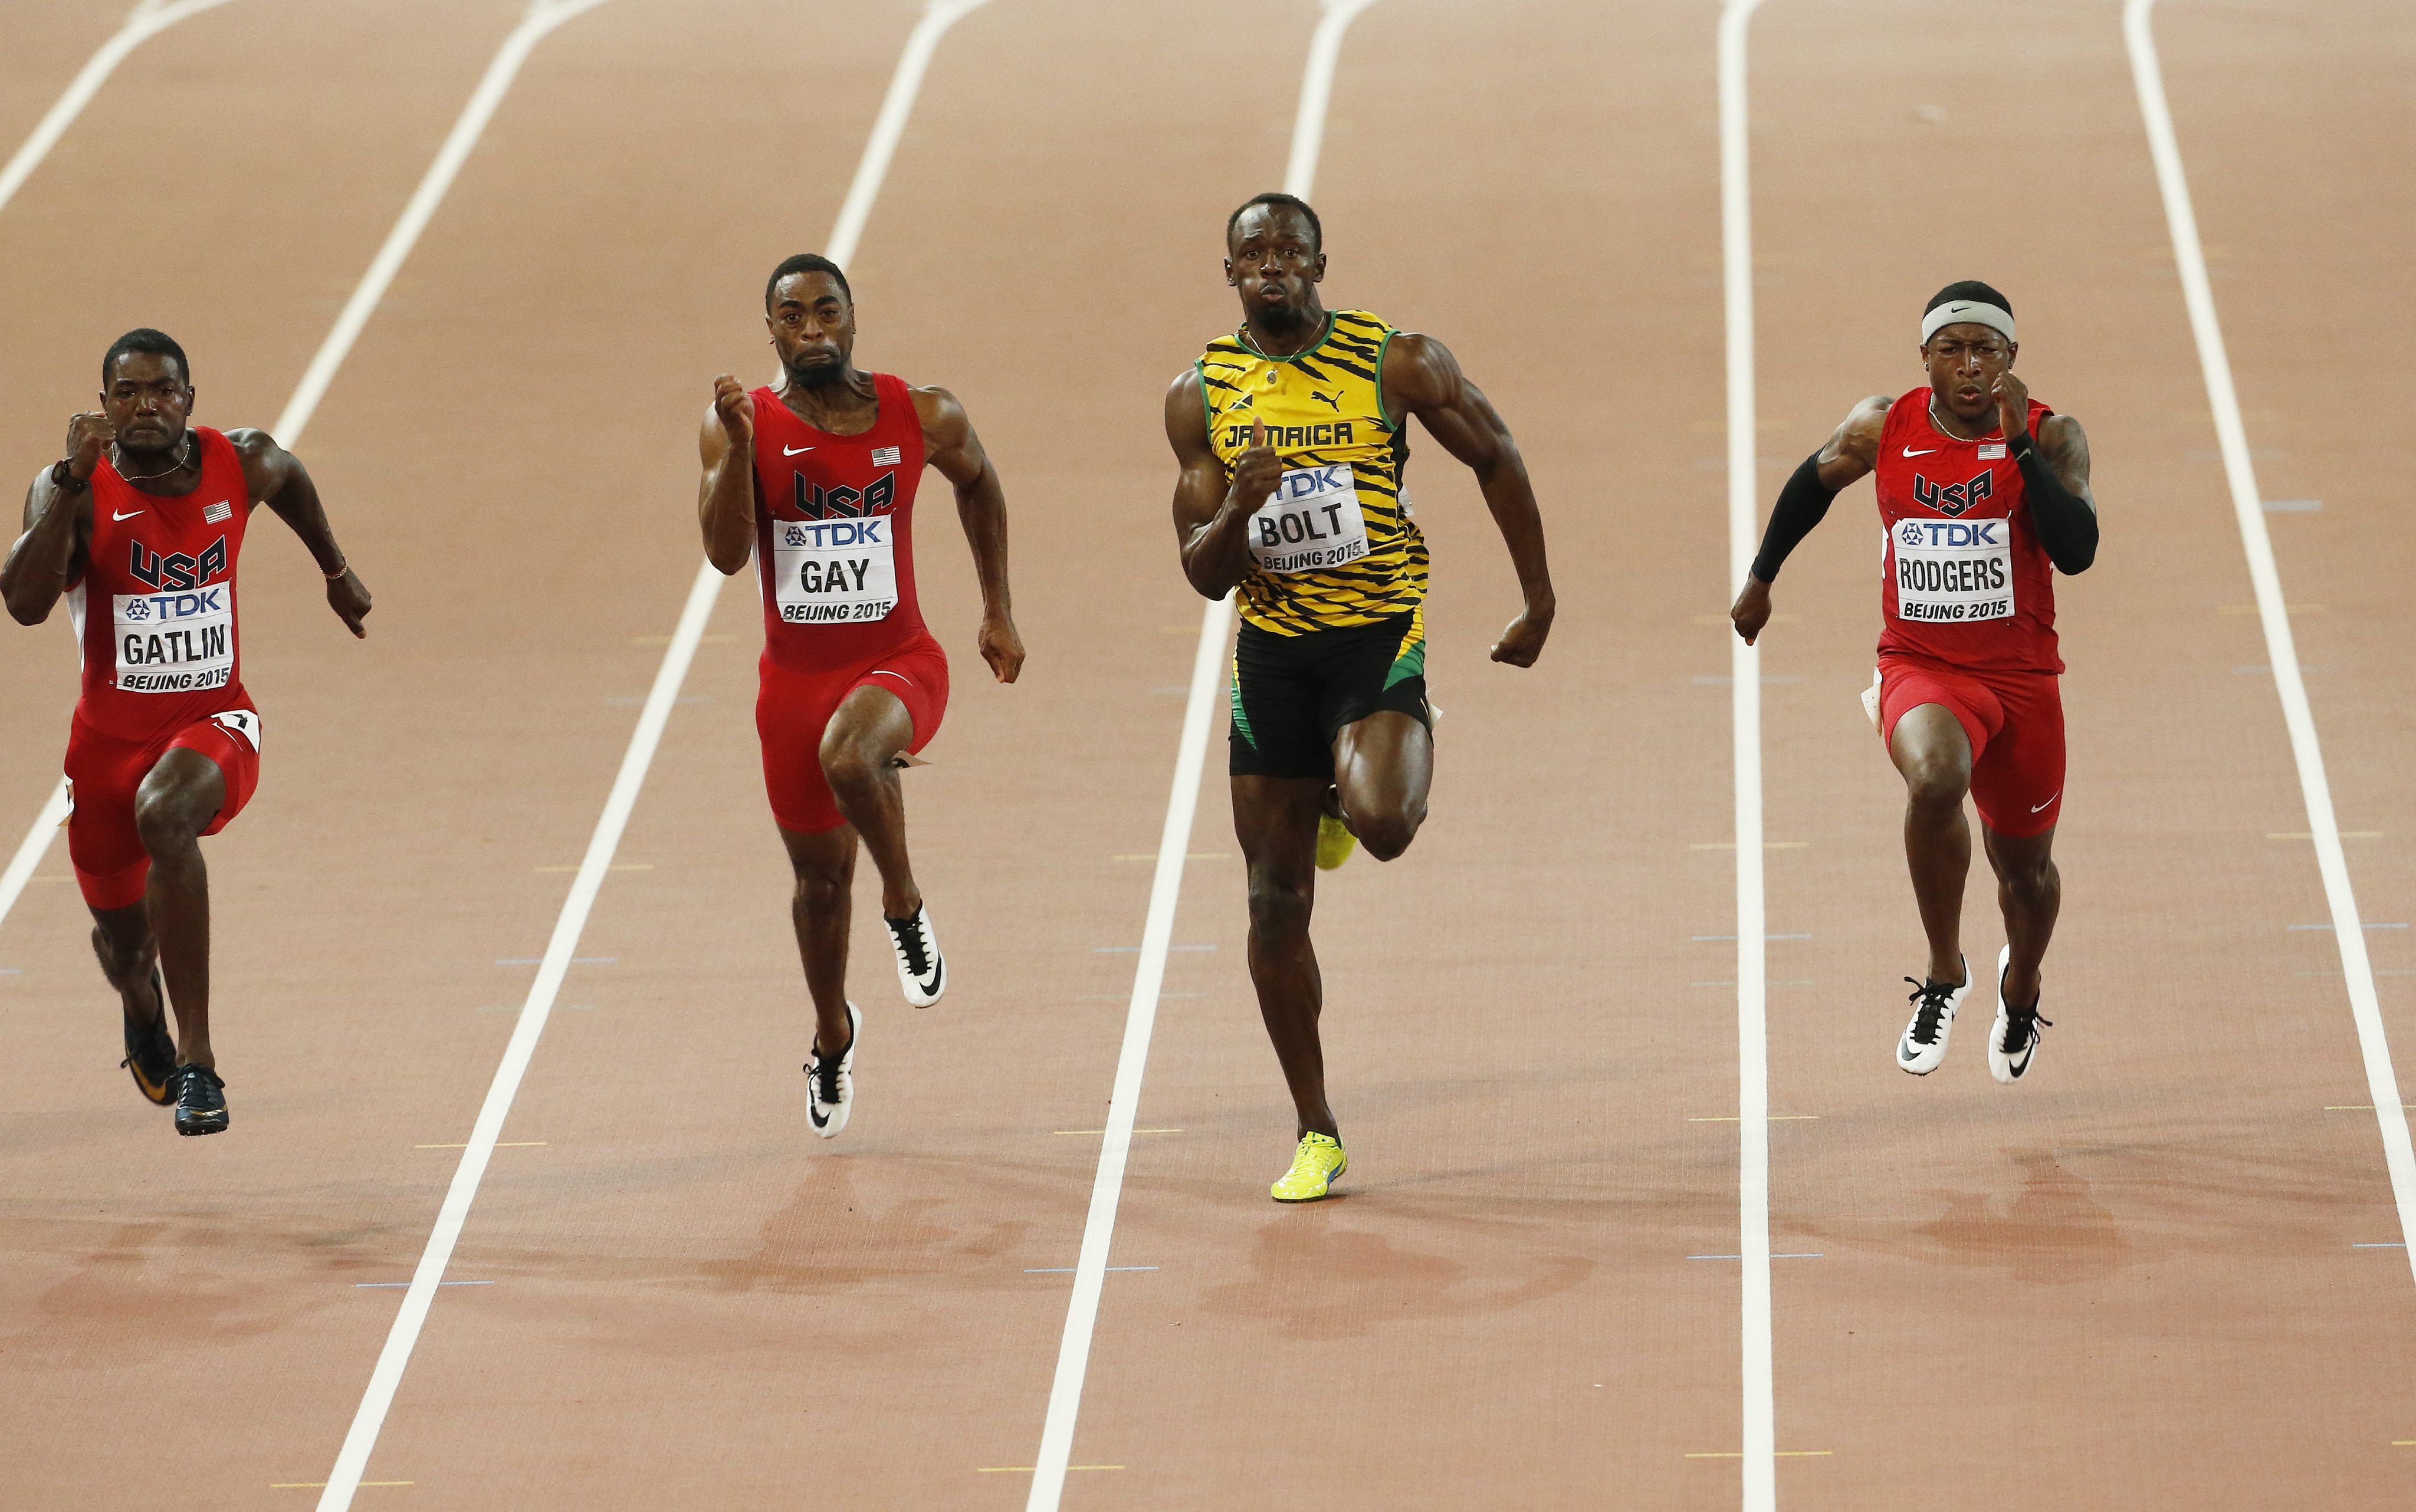 Jamaica's Usain Bolt on his way to winning the gold medal, ahead of arch rival Justin Gatlin (left) in the men's 100m final at the World Athletics Championships in Beijing. Photo: EPA